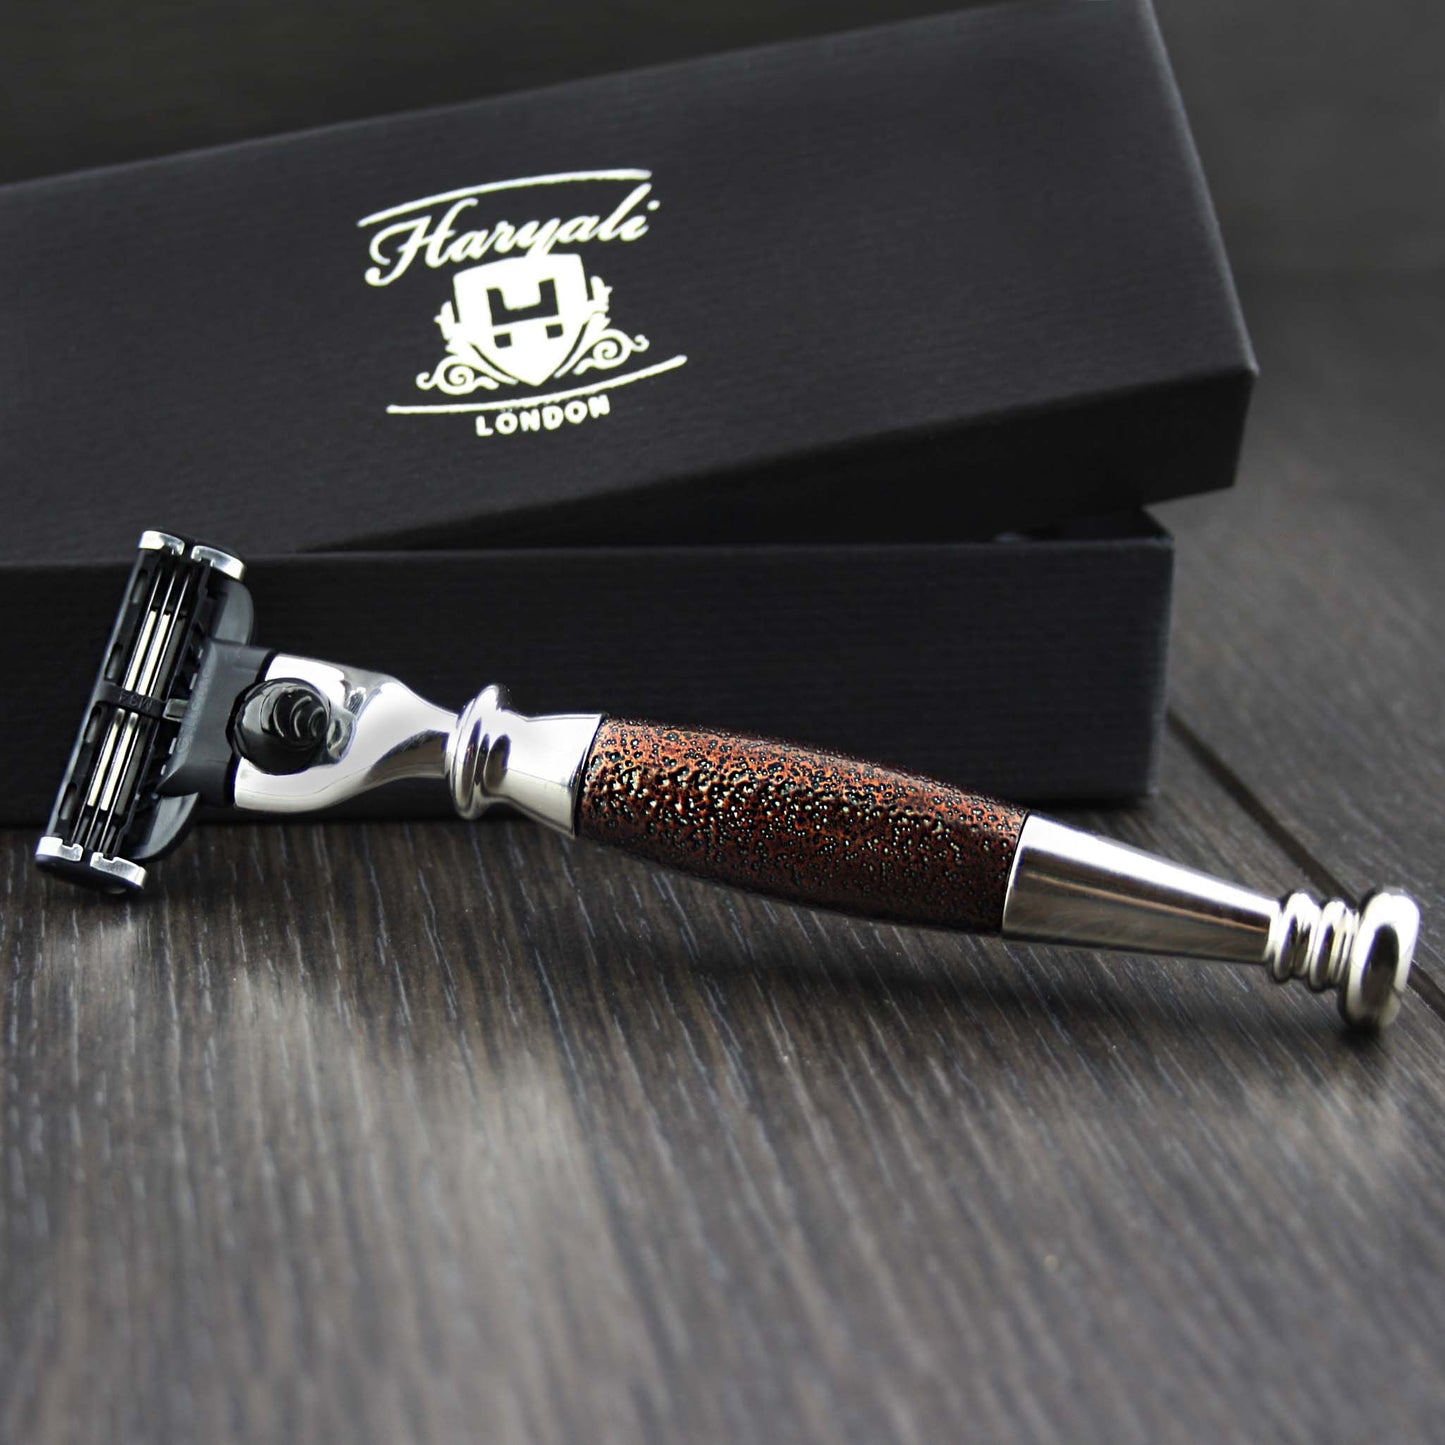 Haryali London 3 Edge Shaving Razor with Maroon Antique Handle Beard and Mustache Safety Razor for Mens Perfect Shave